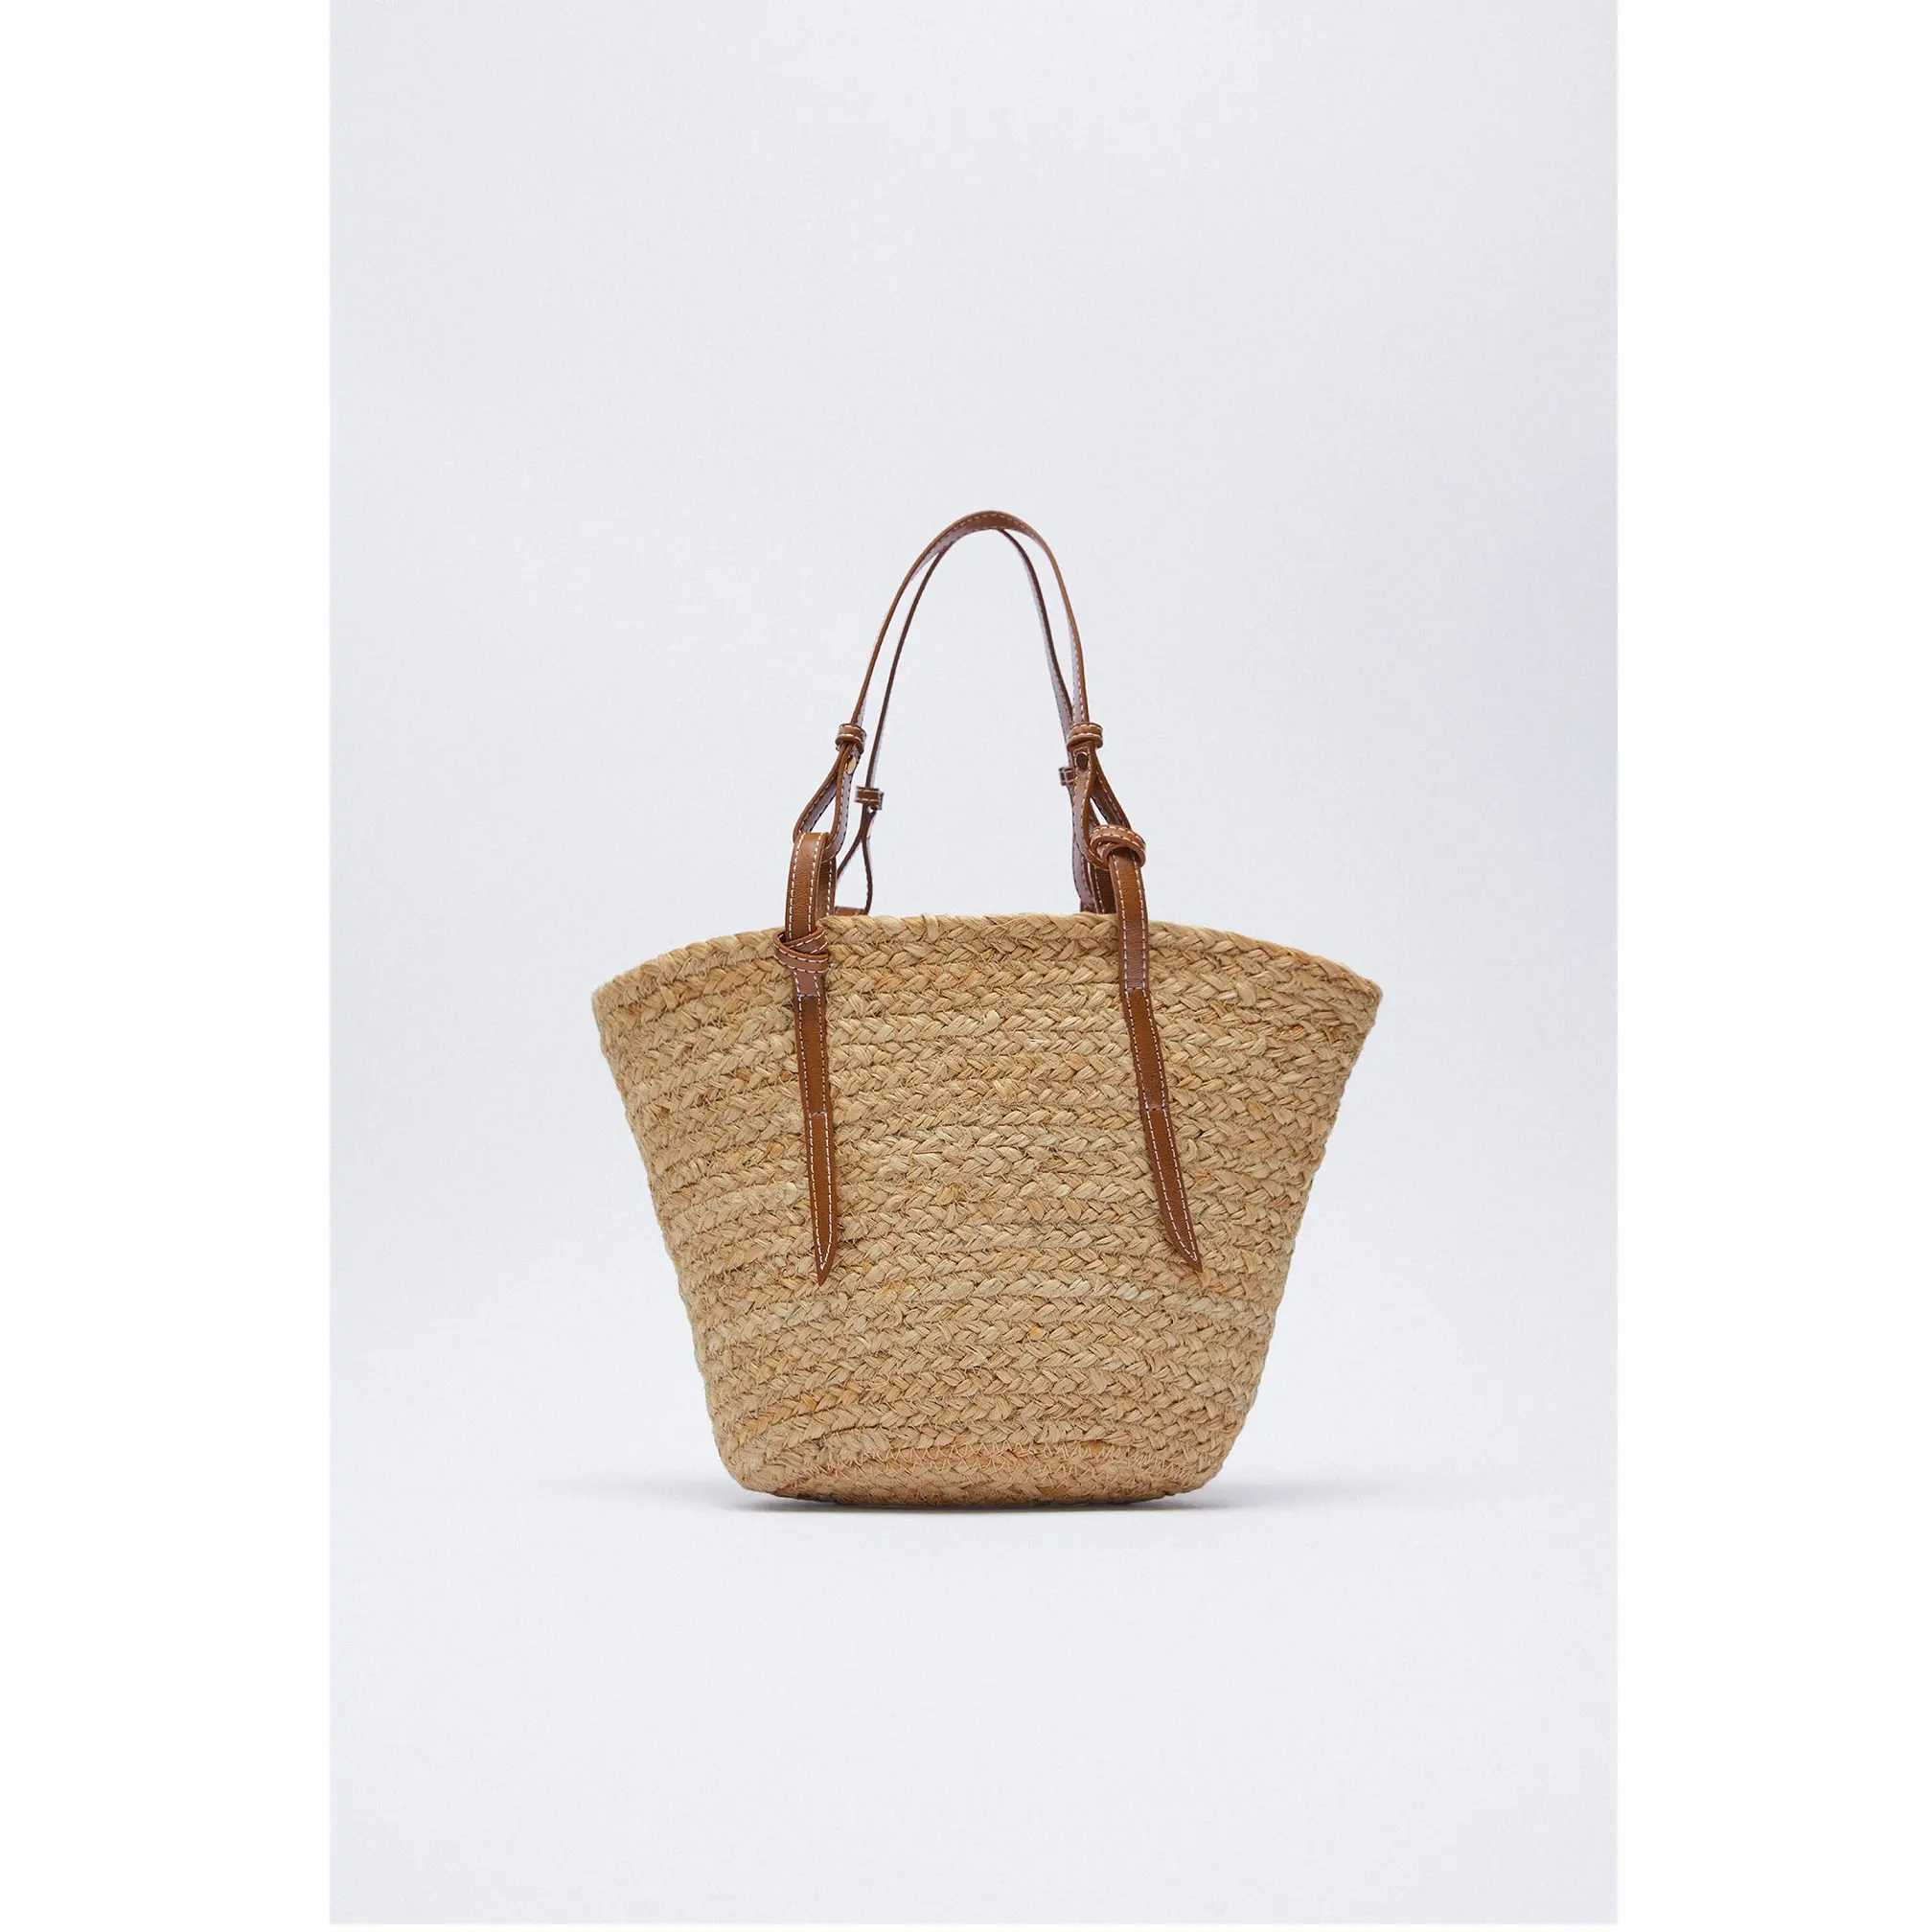 Jute Handbag Basket Jute Bag With Leather Strips Hand Made Jute Bag for Women Buy From Isar International At Lowest Price